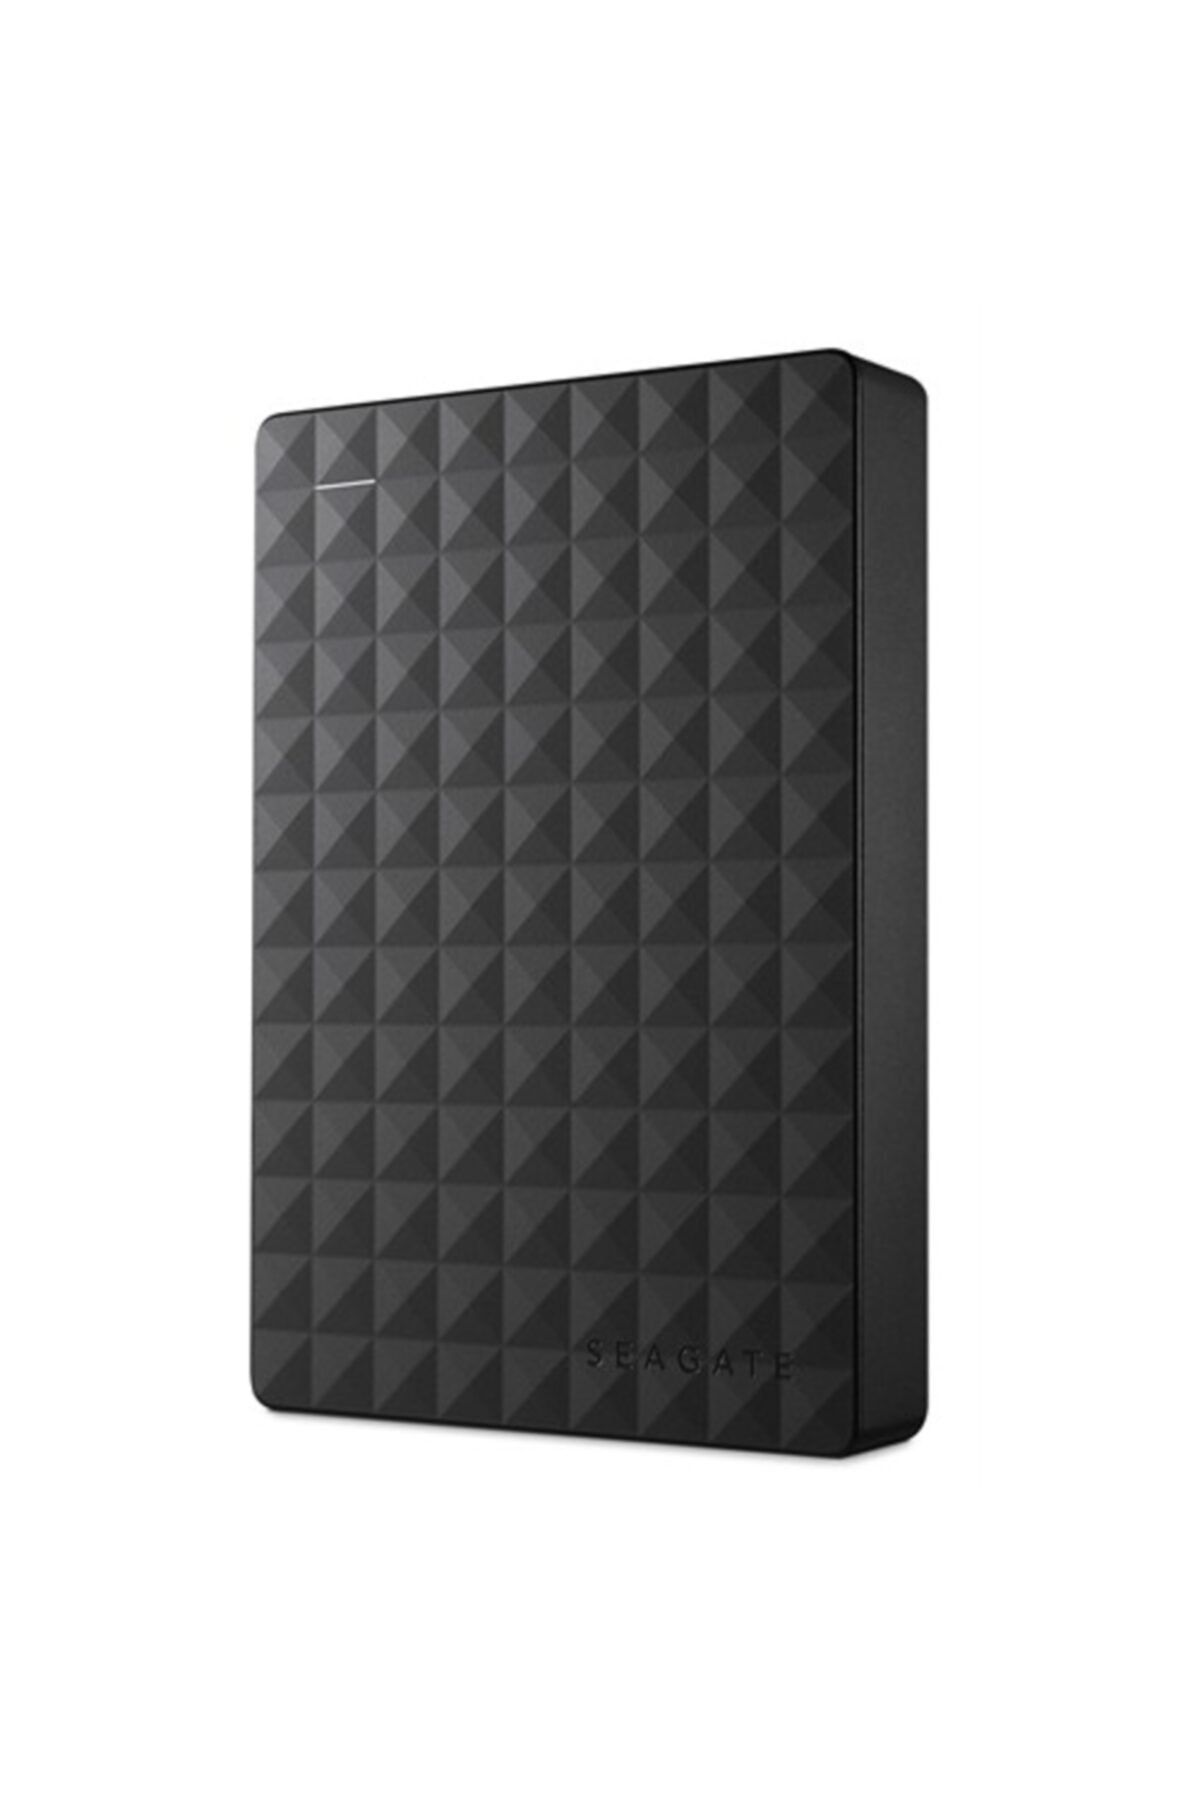 Seagate Expansion Stea1000400 1tb 2,5" Usb3,0 Harici Hdd